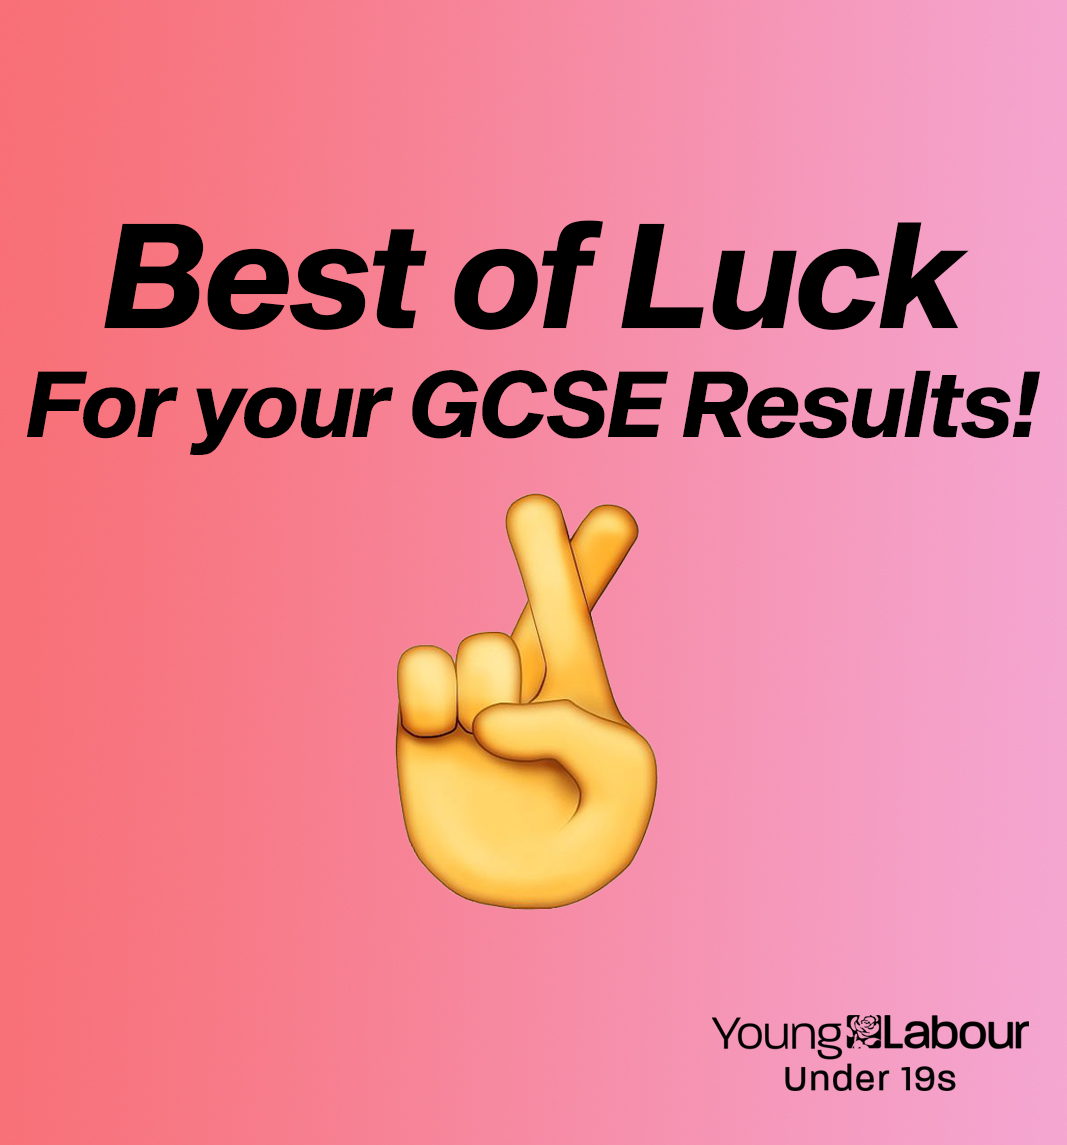 We’re wishing the best of luck to all GCSE students awaiting their results tomorrow!   You've got this – your hard work and dedication will pay off. 📚📷#GCSEs2023